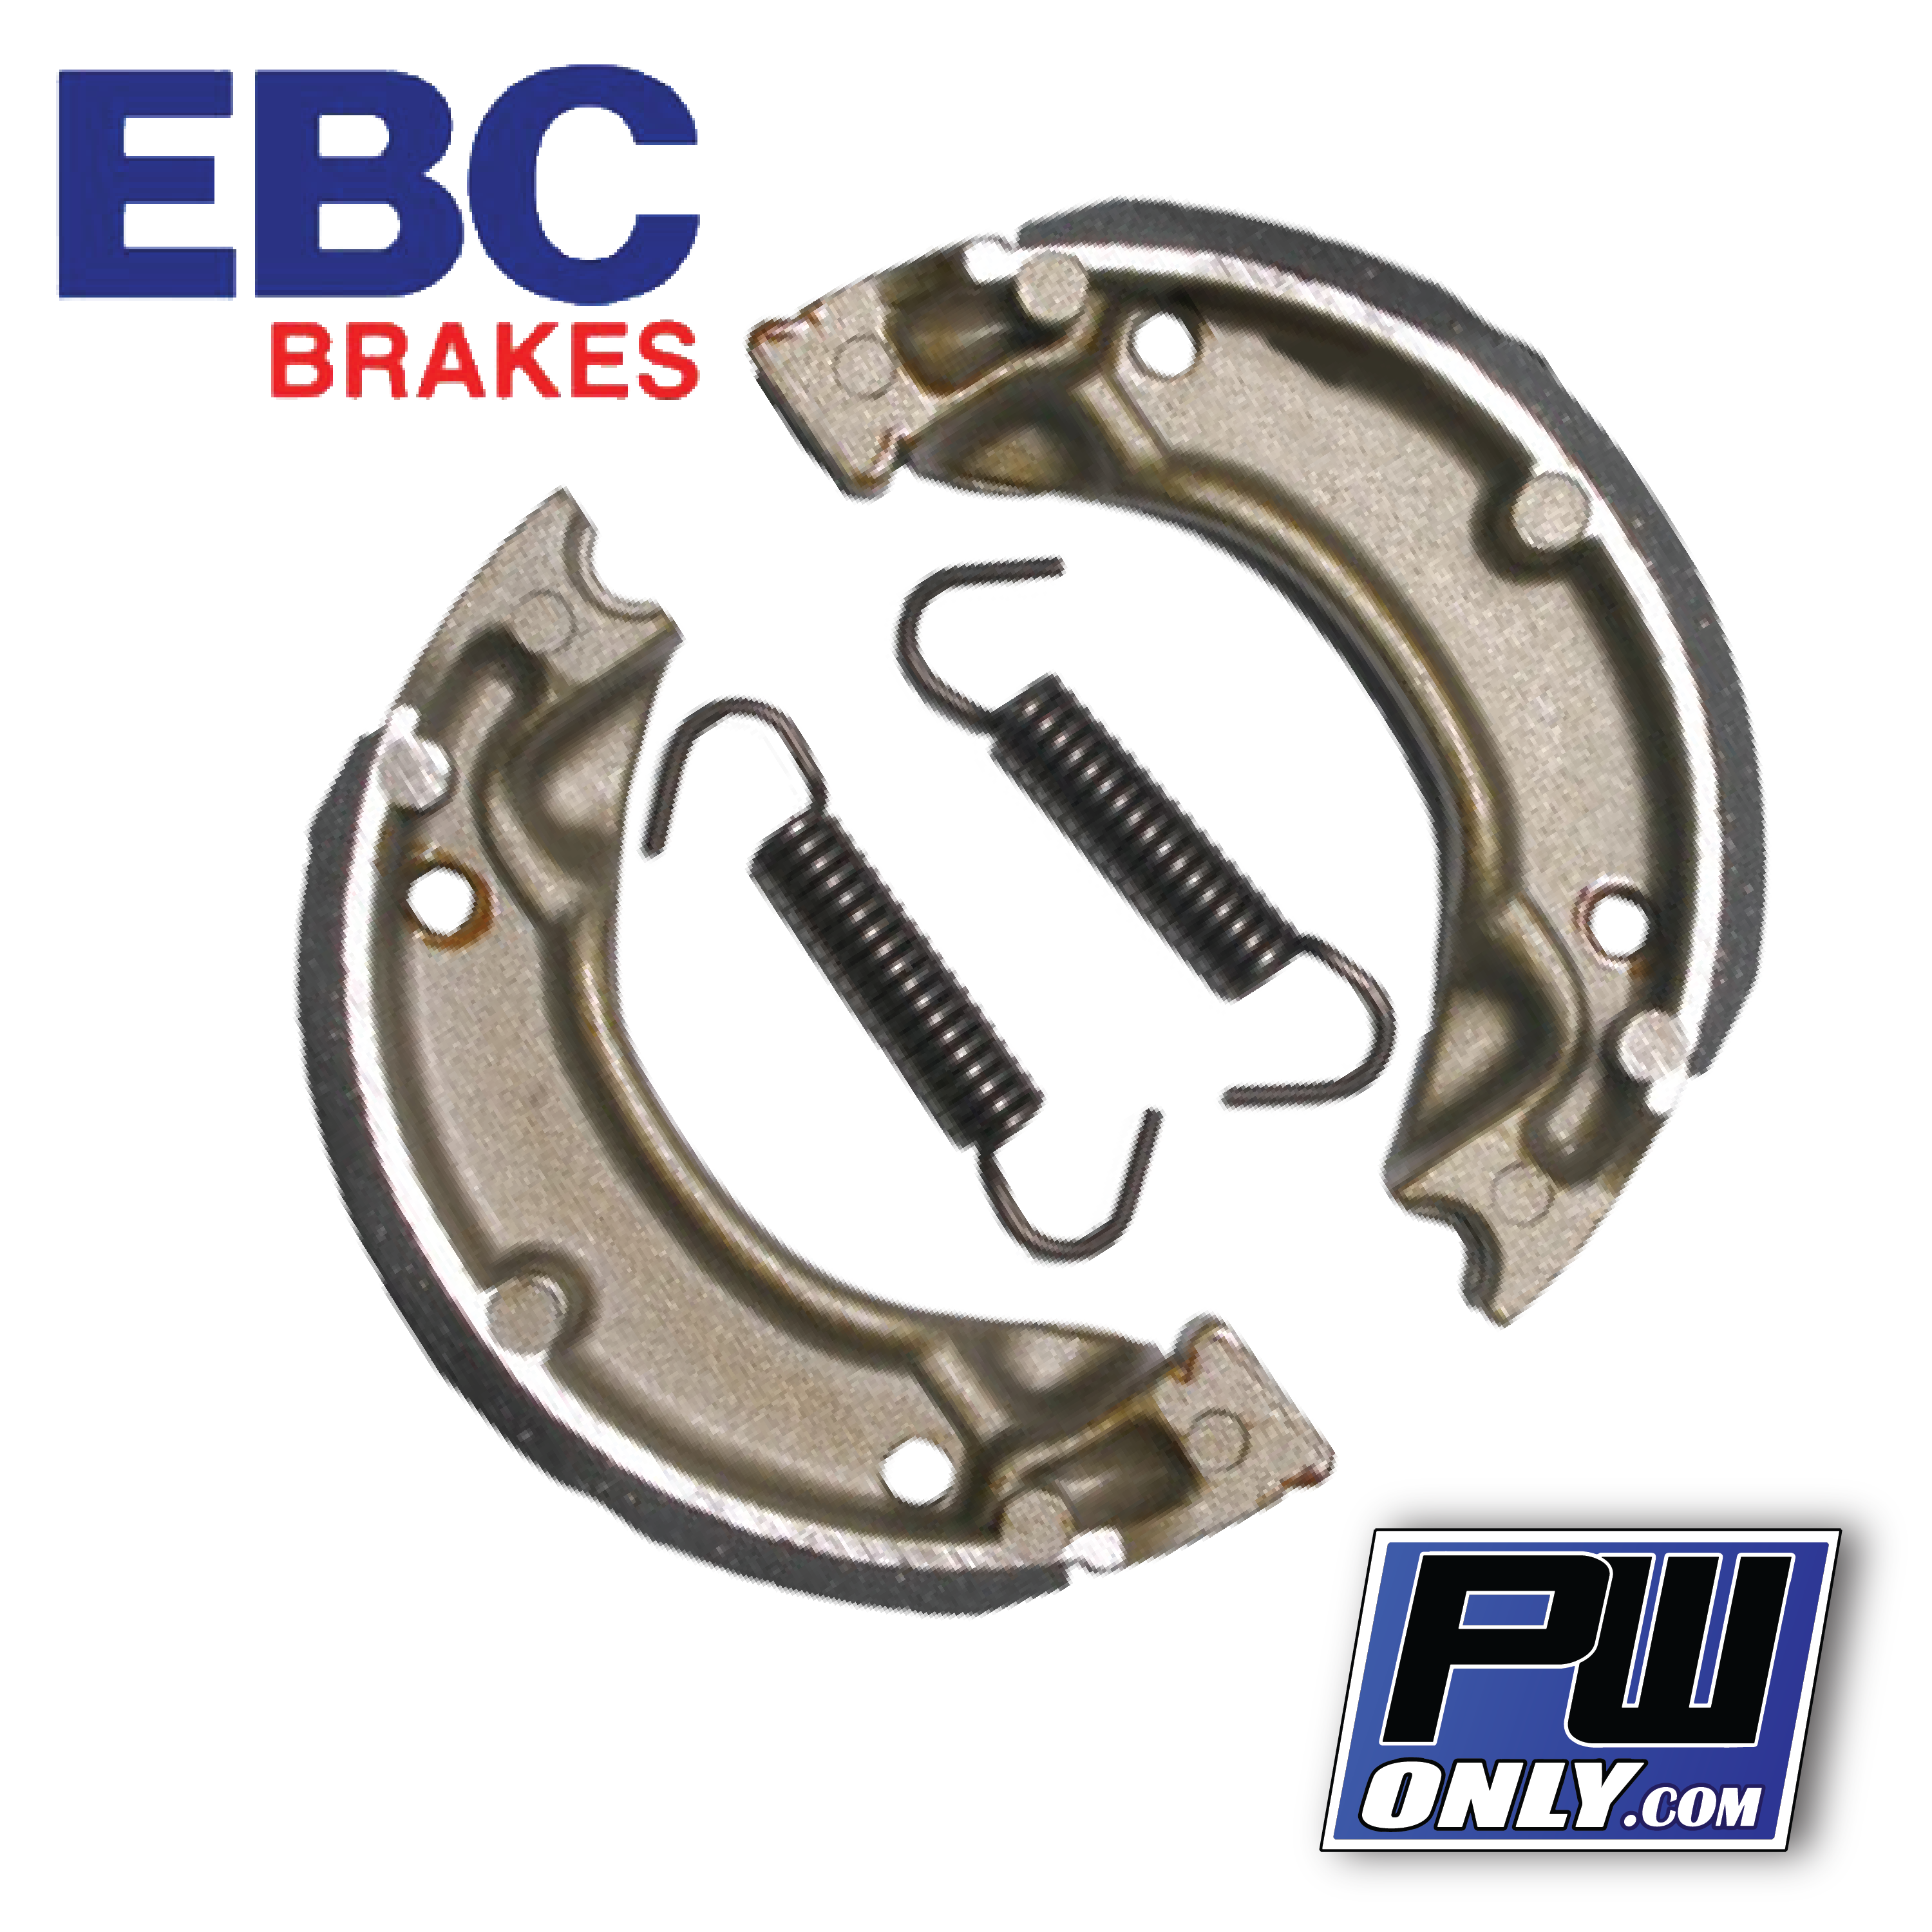 Front Drum Brake Shoe w/Springs for YAMAHA PW 80 Y-Zinger Mini 1983-2010 PW80 